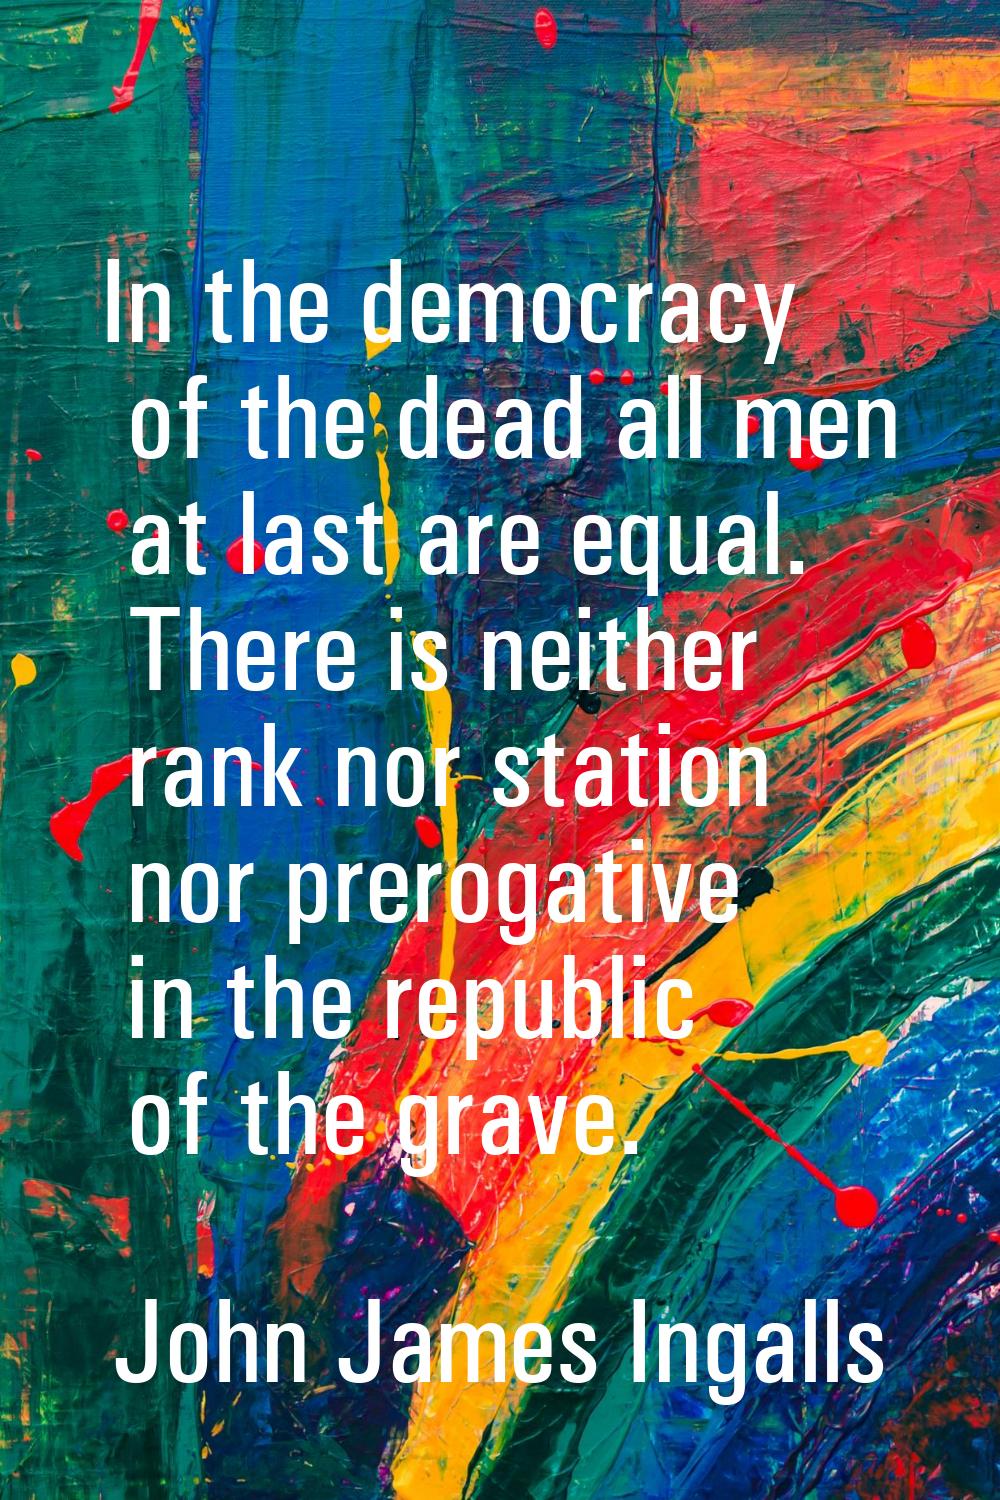 In the democracy of the dead all men at last are equal. There is neither rank nor station nor prero